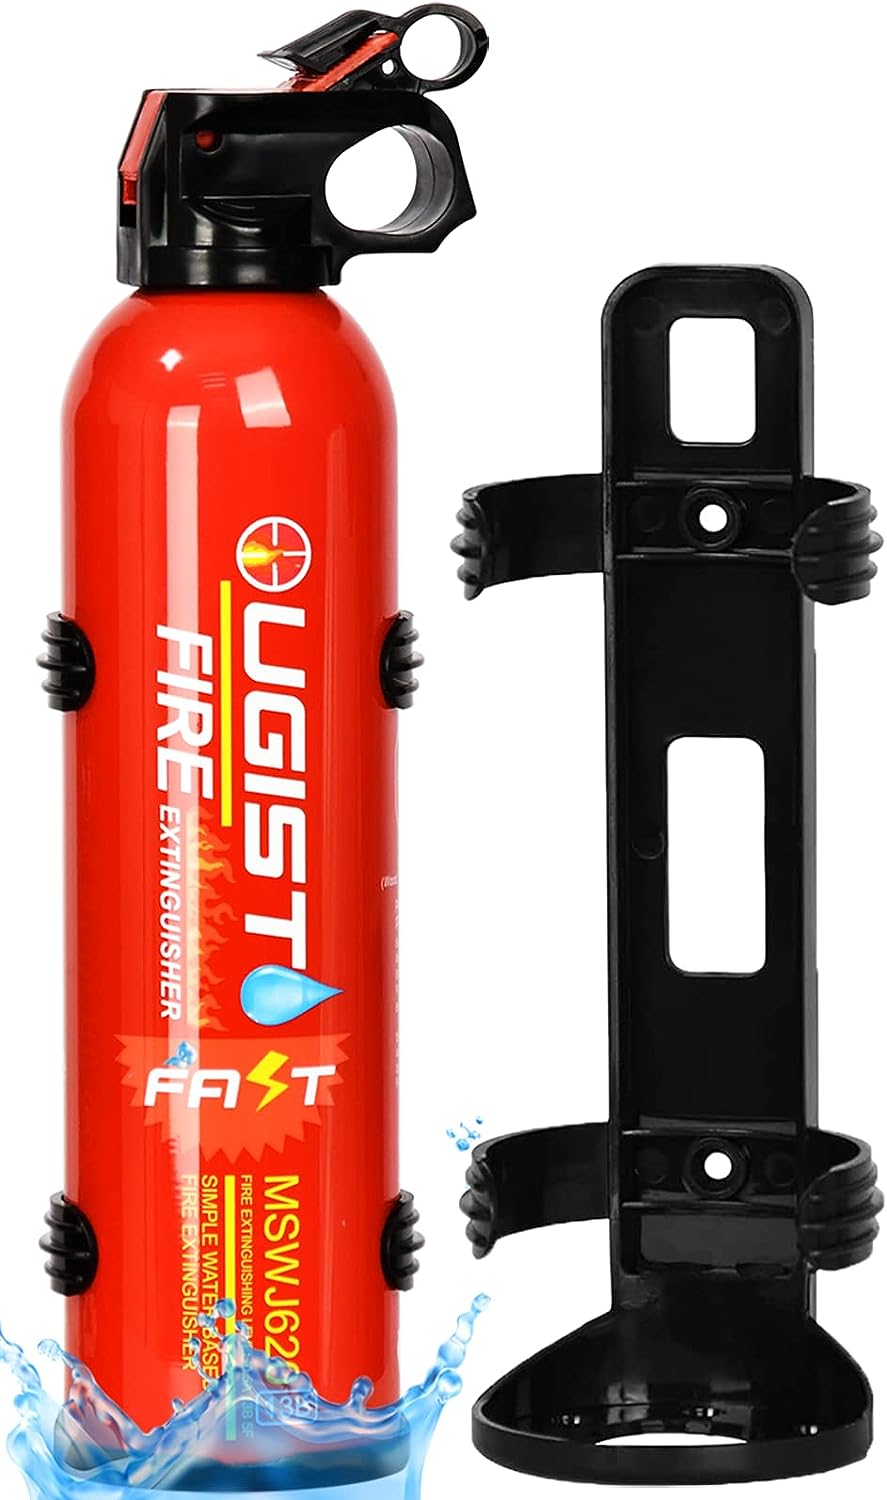 Ougist Fire Extinguisher with Mount - 4 in-1 Fire [...]